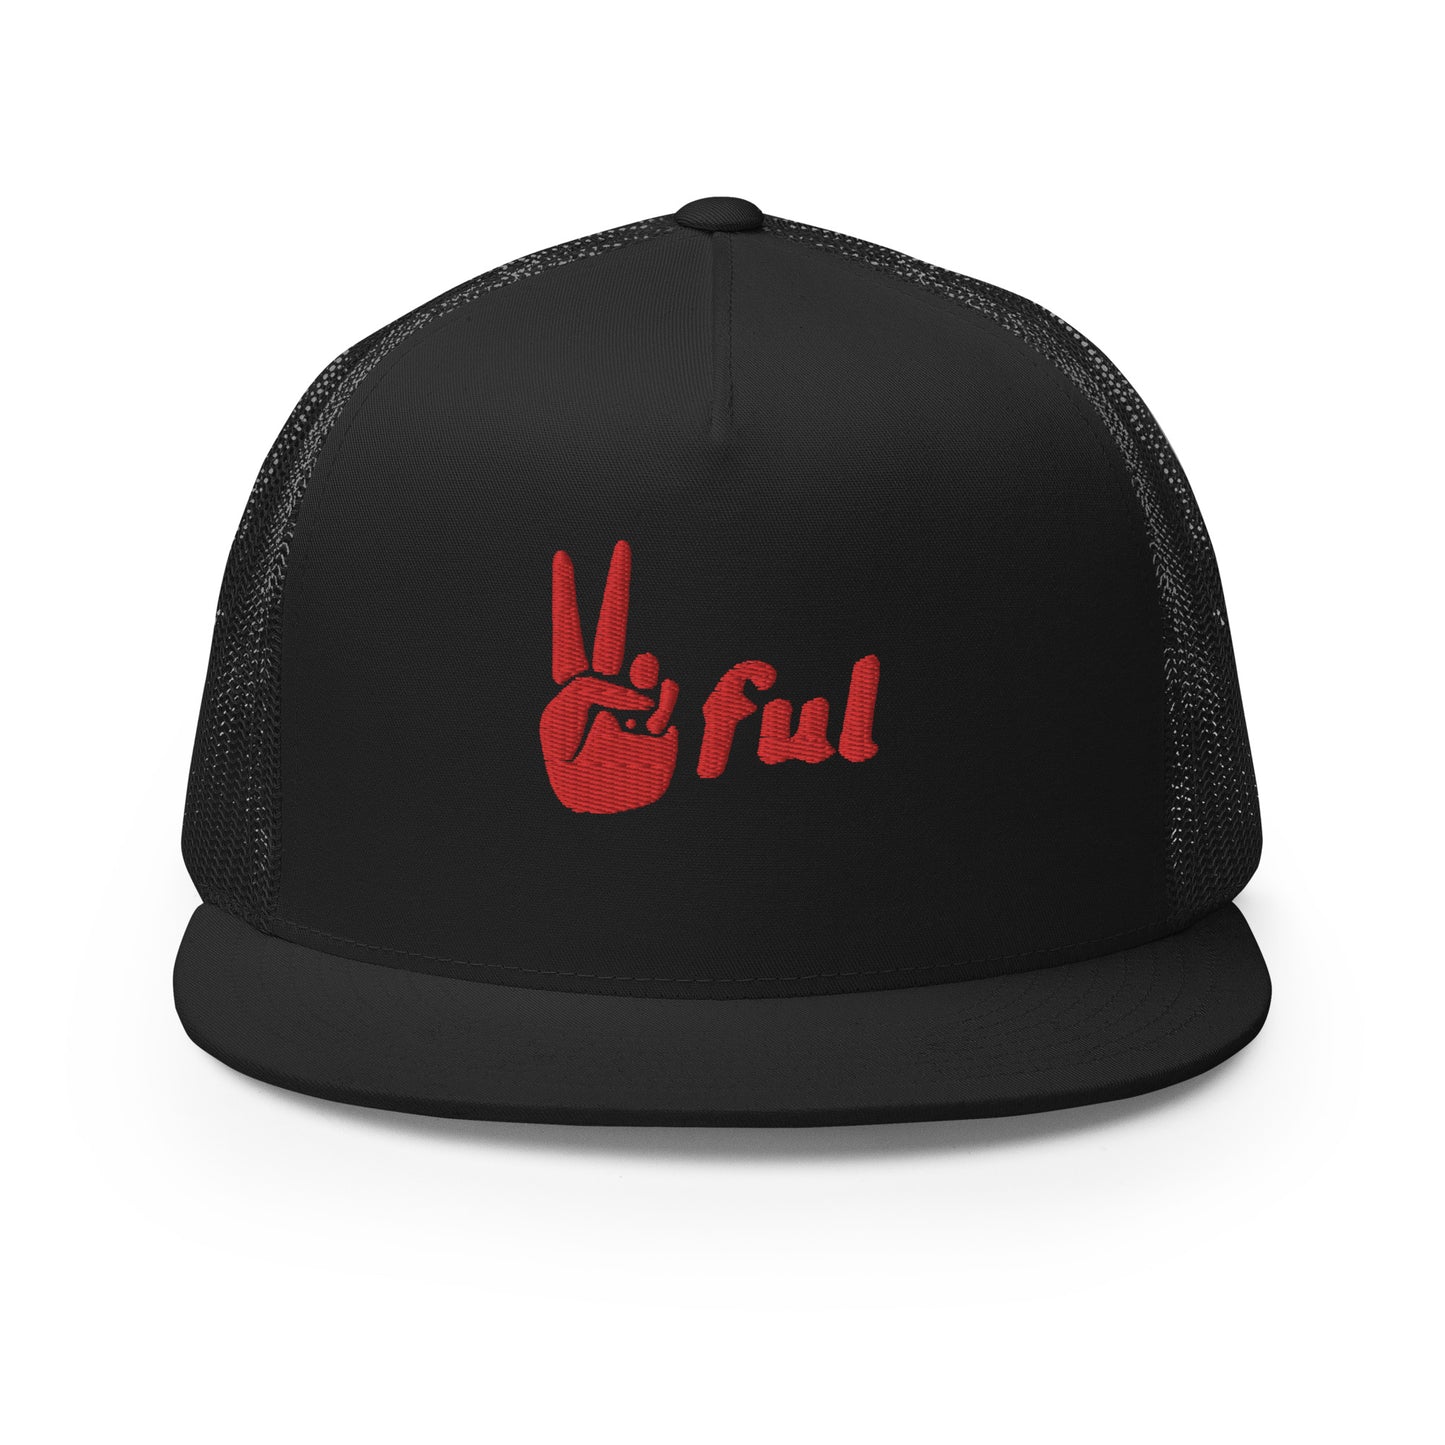 Peaceful Trucker Cap Red Embroidered